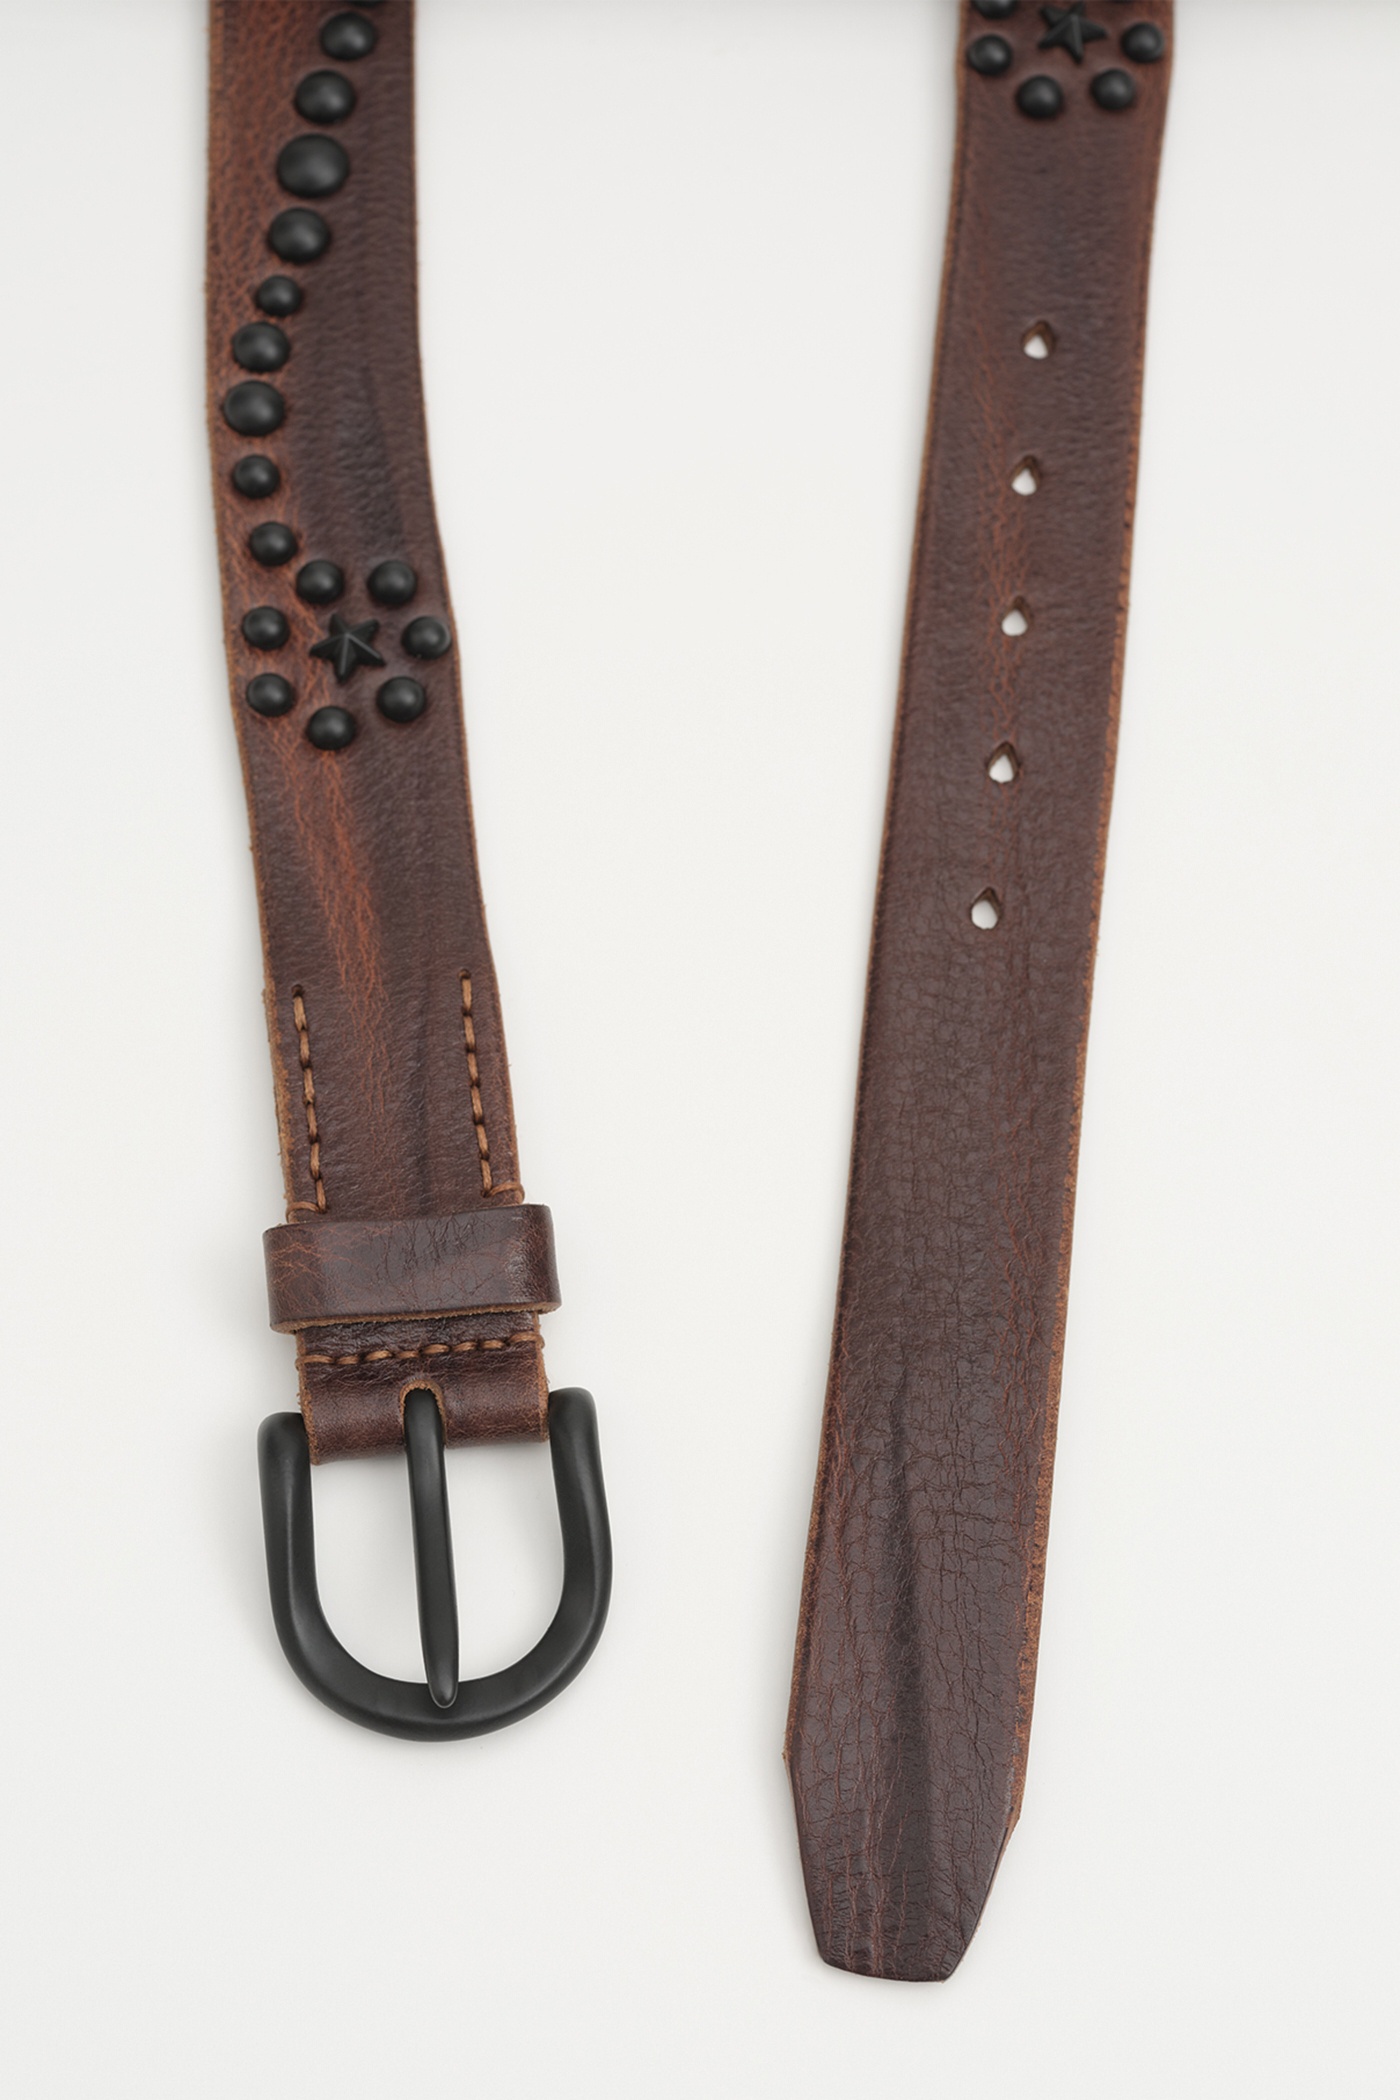 Star Fall Belt Brown Leather - 2